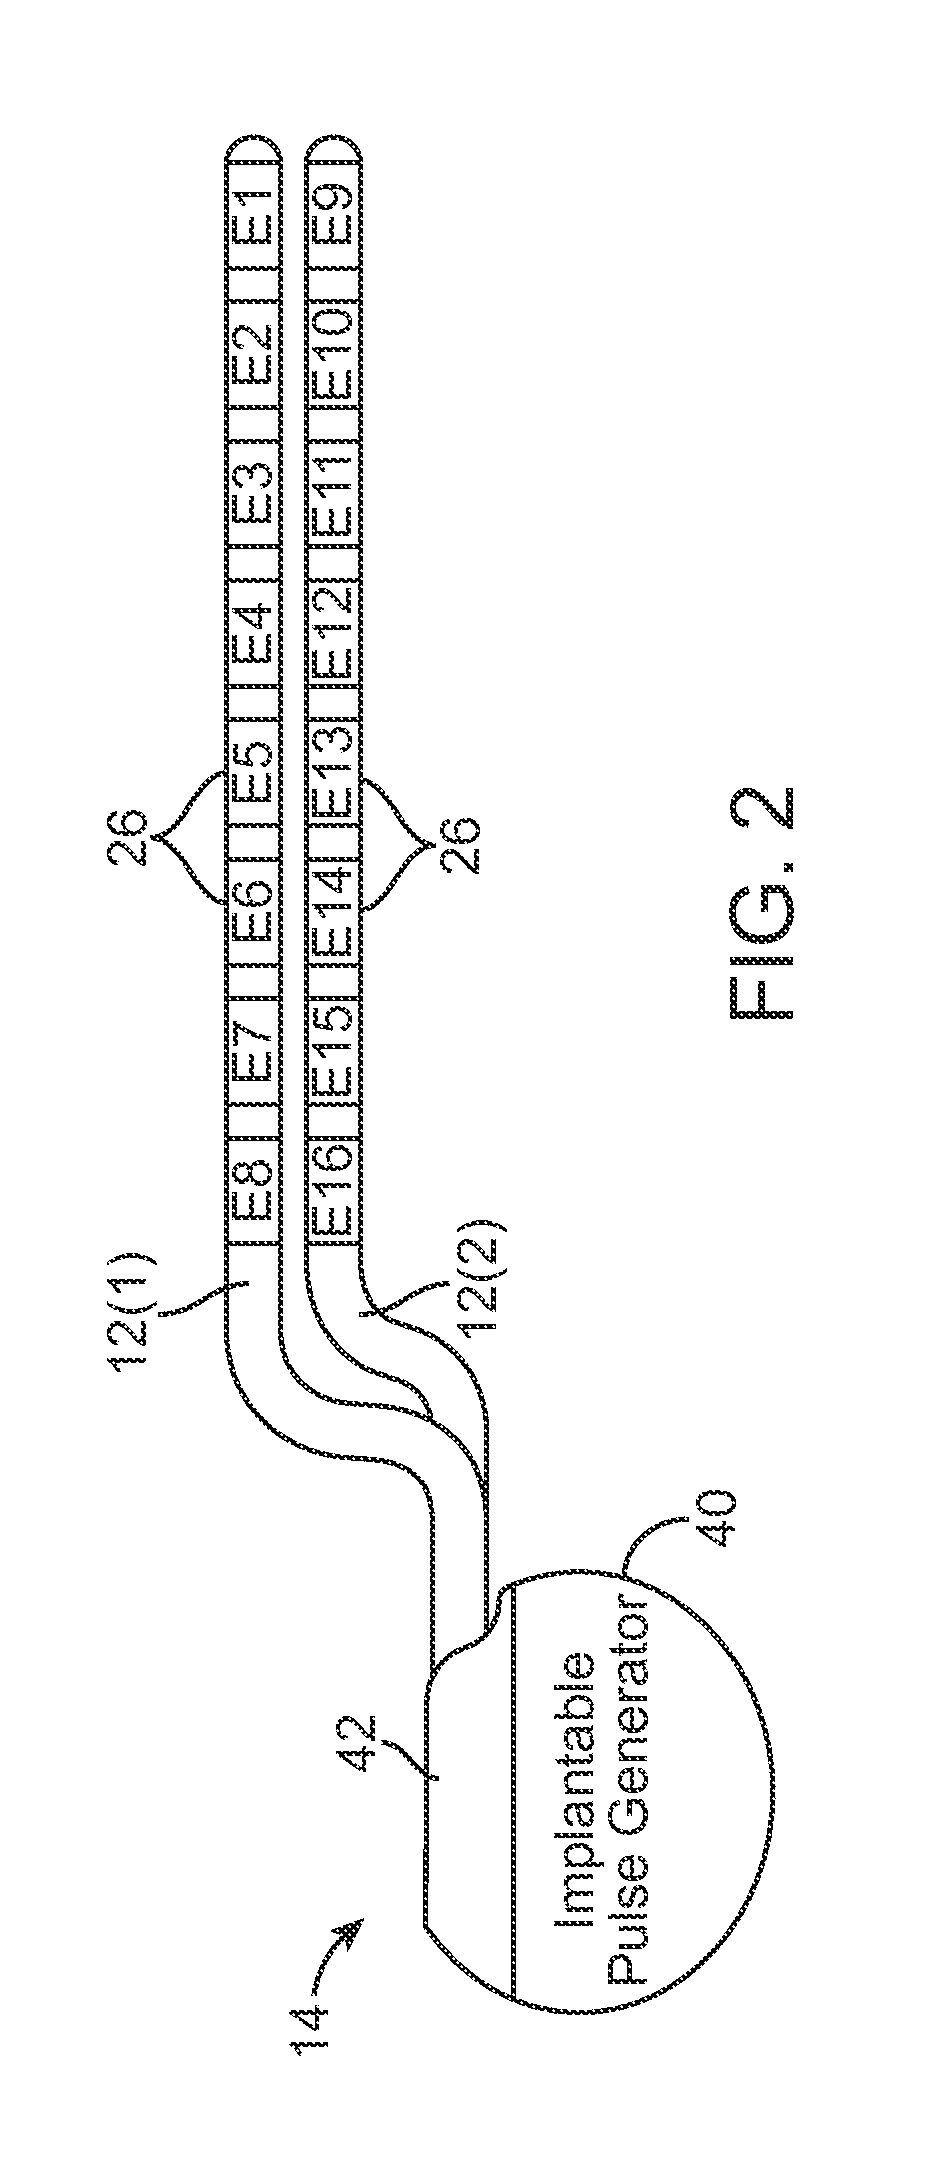 Systems and methods of providing modulation therapy without patient-perception of stimulation